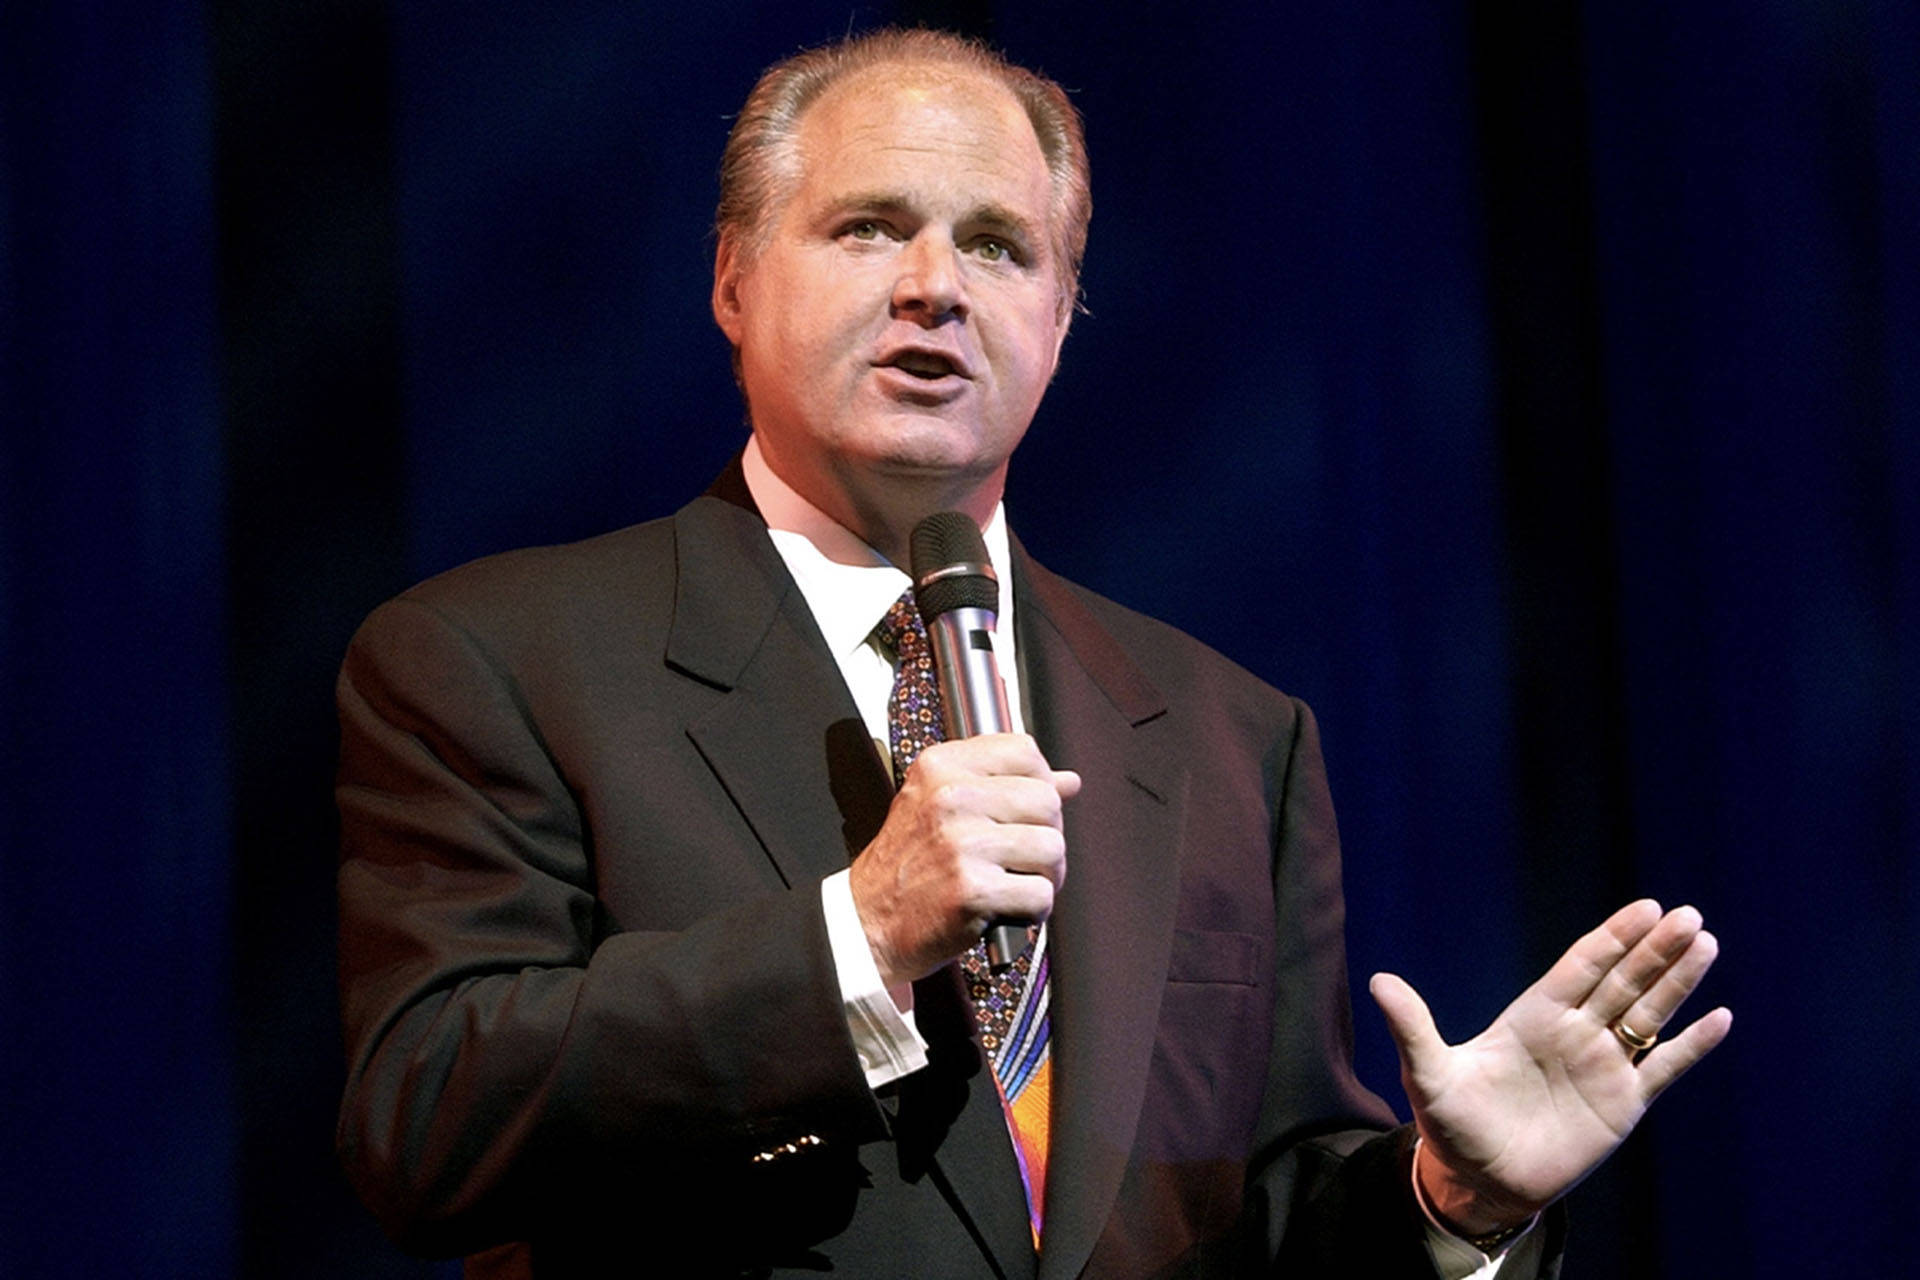 Rush Limbaugh At Ford Theatre Background